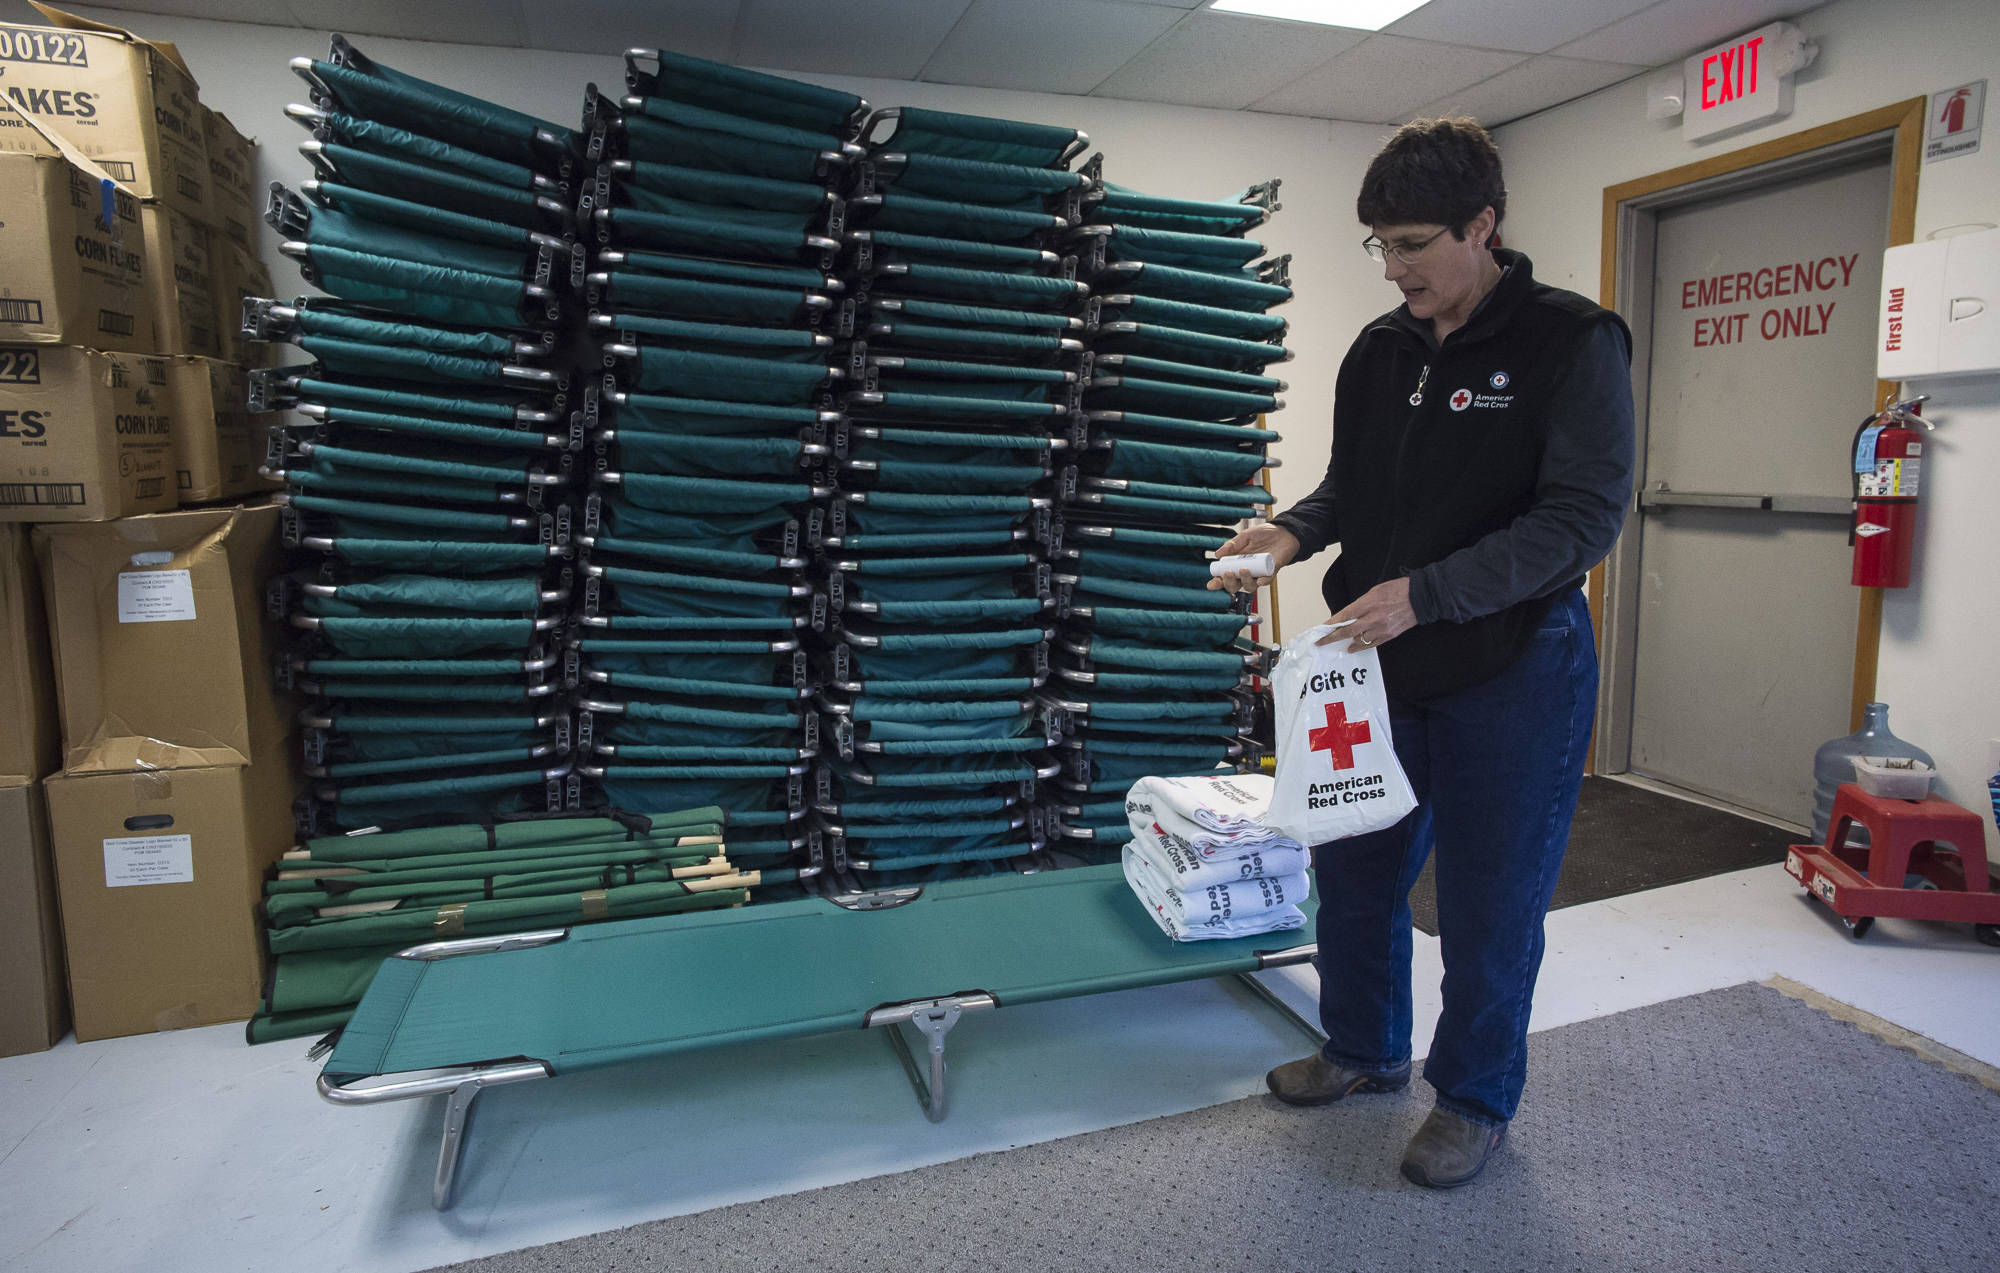 Volunteer Sudie Hargis gives a tour of the supply room during an open house at the new Southeast office of the American Red Cross of Southeast Alaska on Thursday, April 26, 2018. (Michael Penn | Juneau Empire)